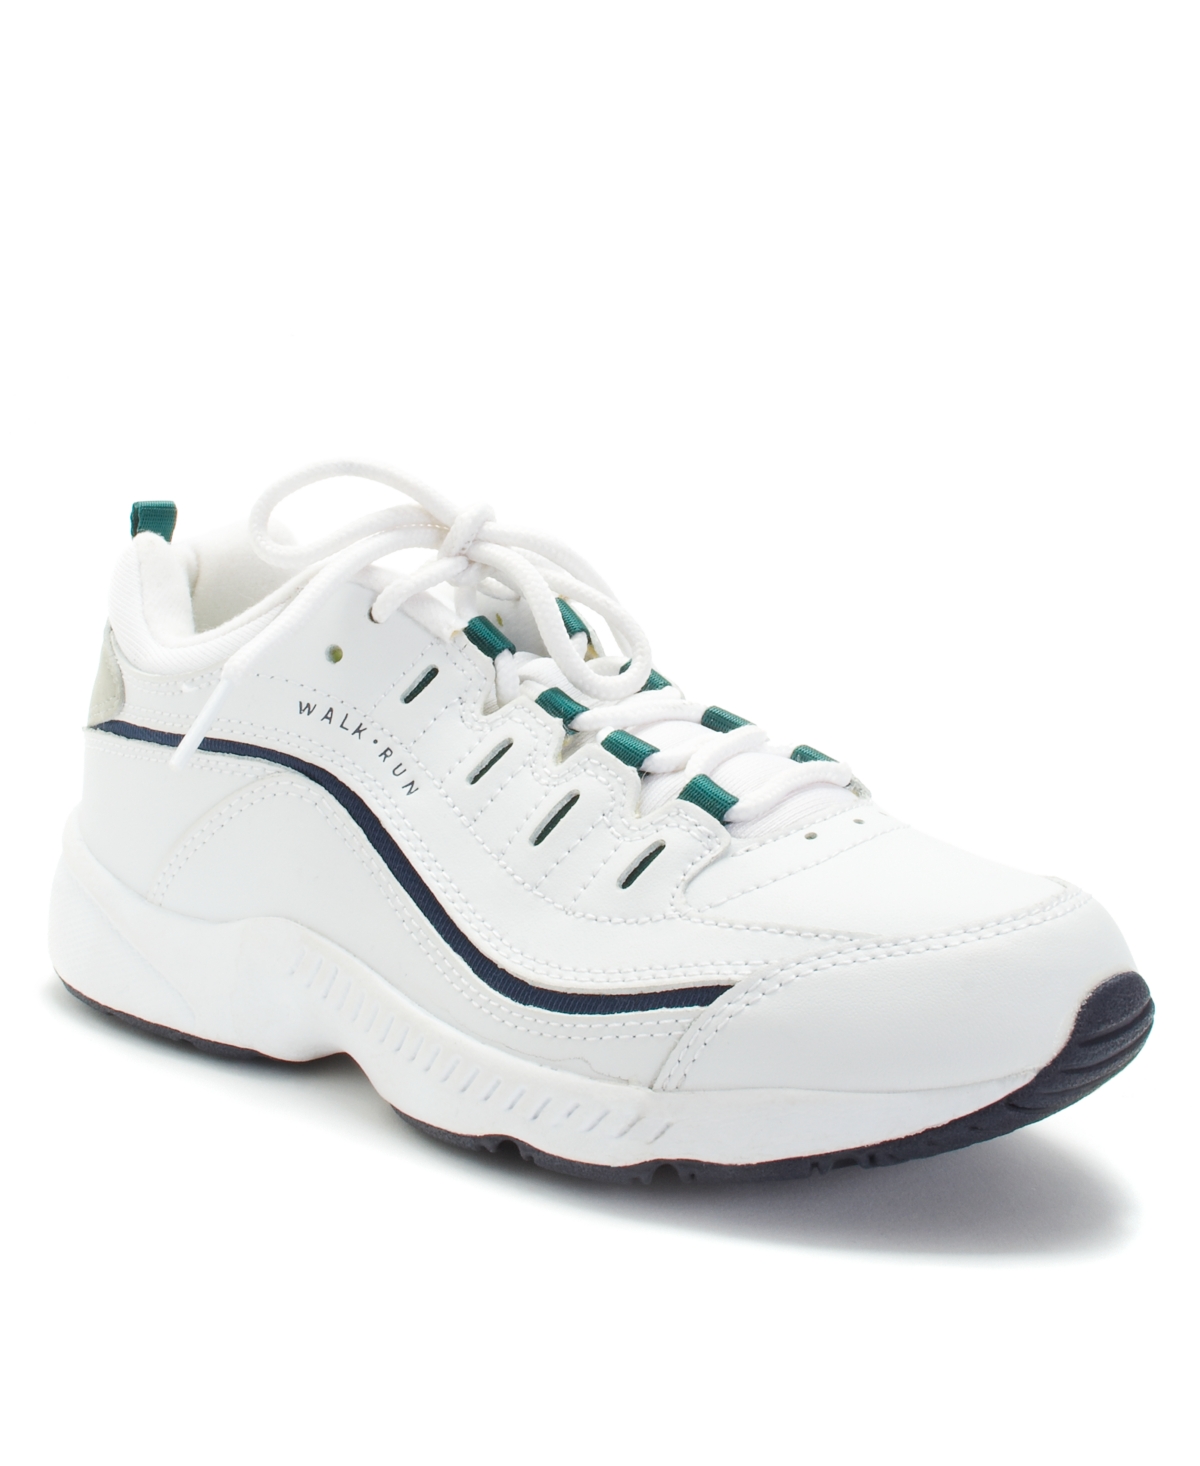 UPC 029005565840 product image for Easy Spirit Women's Romy Round Toe Casual Lace Up Walking Shoes Women's Shoes | upcitemdb.com